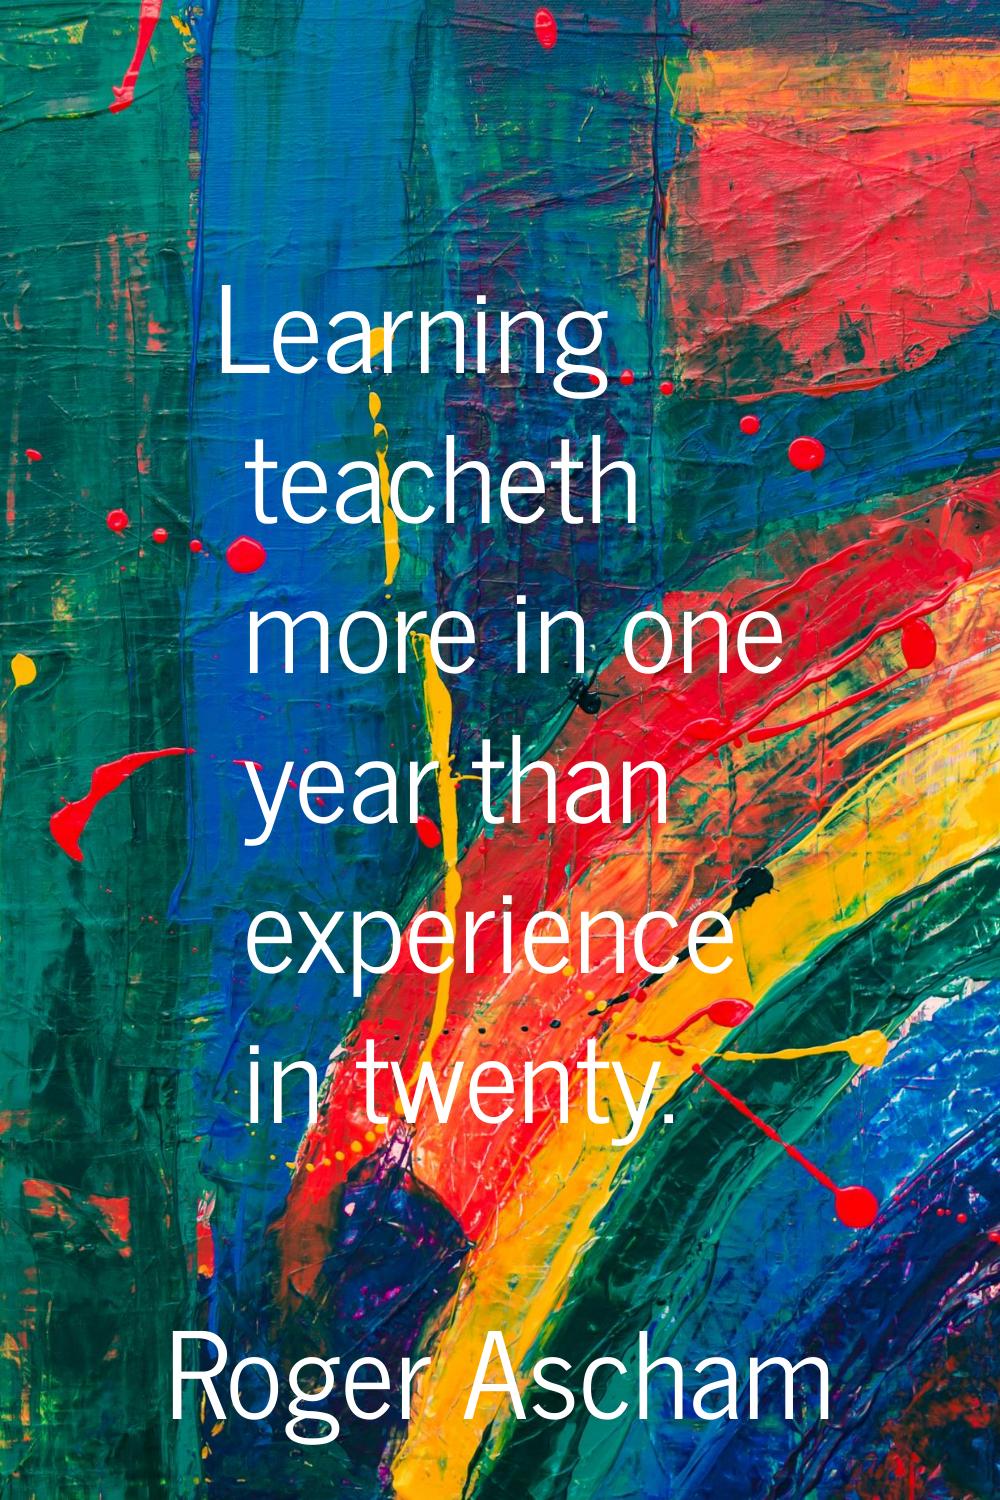 Learning teacheth more in one year than experience in twenty.